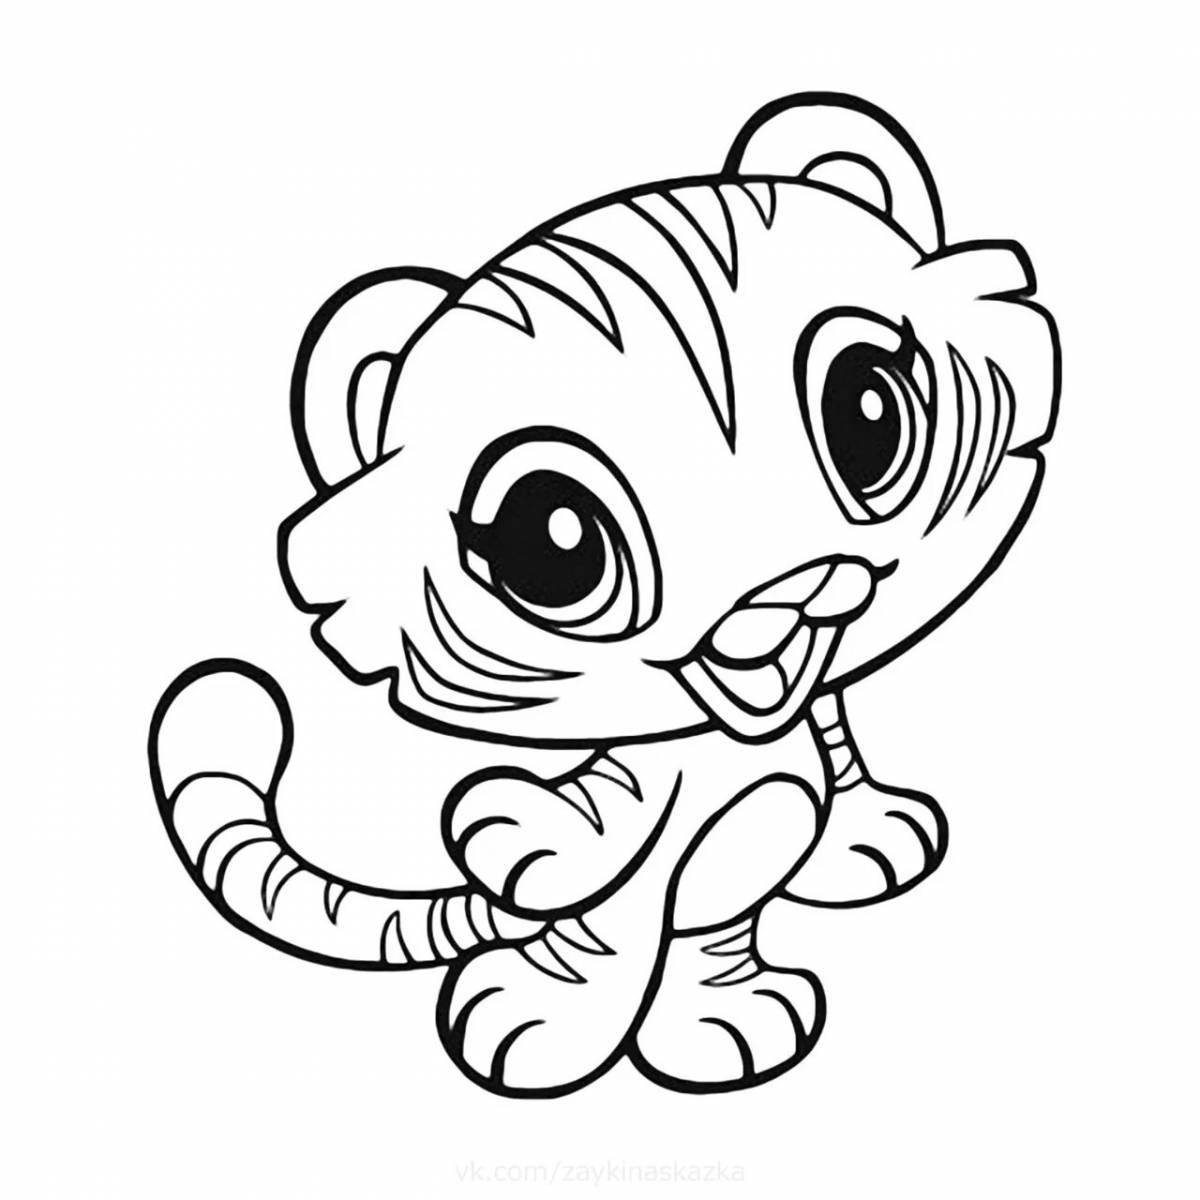 Cute coloring pages little animals for girls